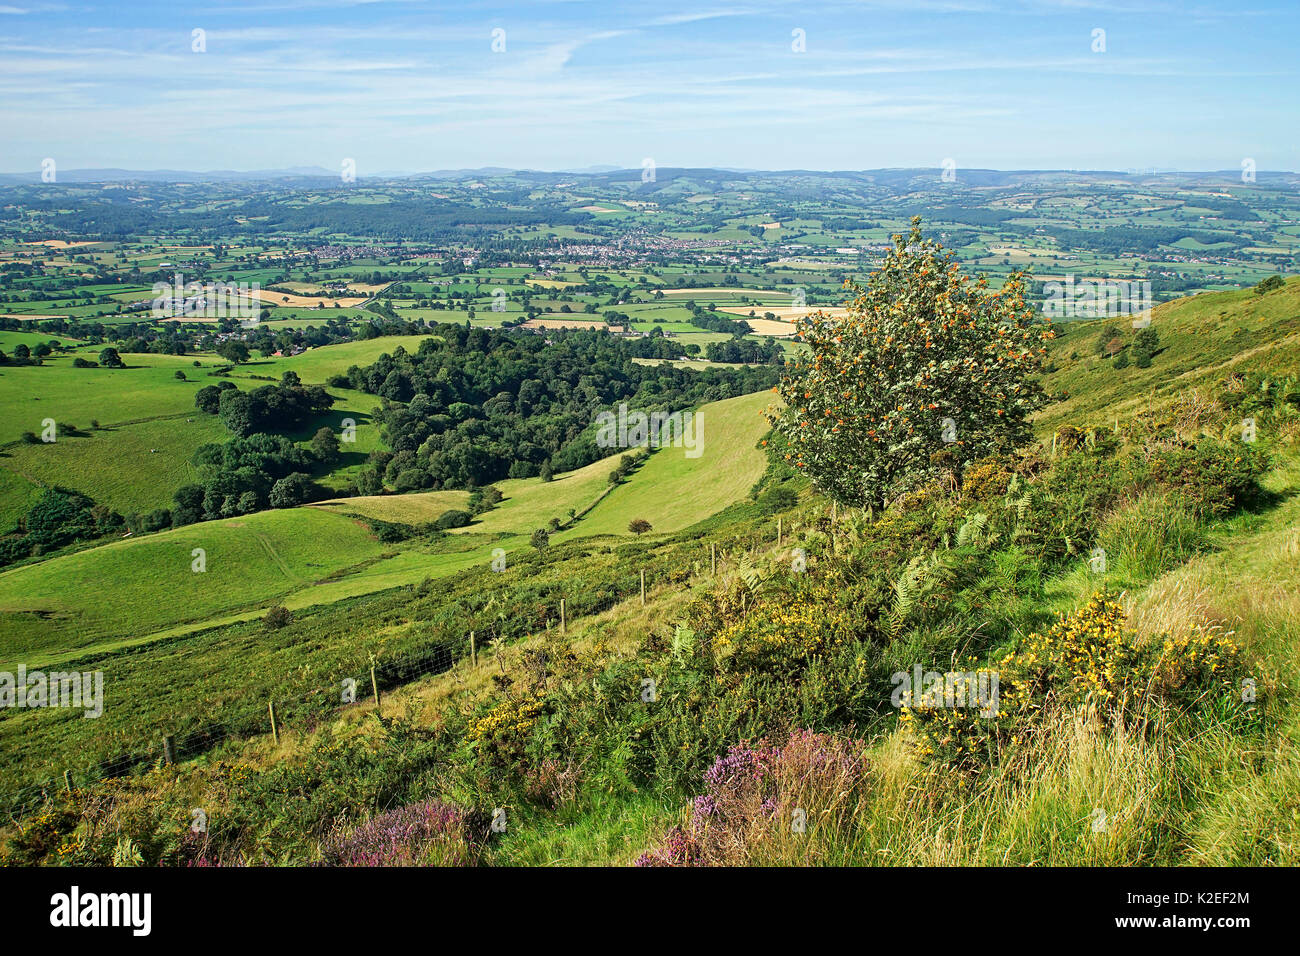 View looking west across the Vale of Clwyd from the Offa's Dyke path leading to the summit of Moel Famau in the Clwydian Mountain Range with the town of Ruthin in the center, North Wales, UK, August. Stock Photo